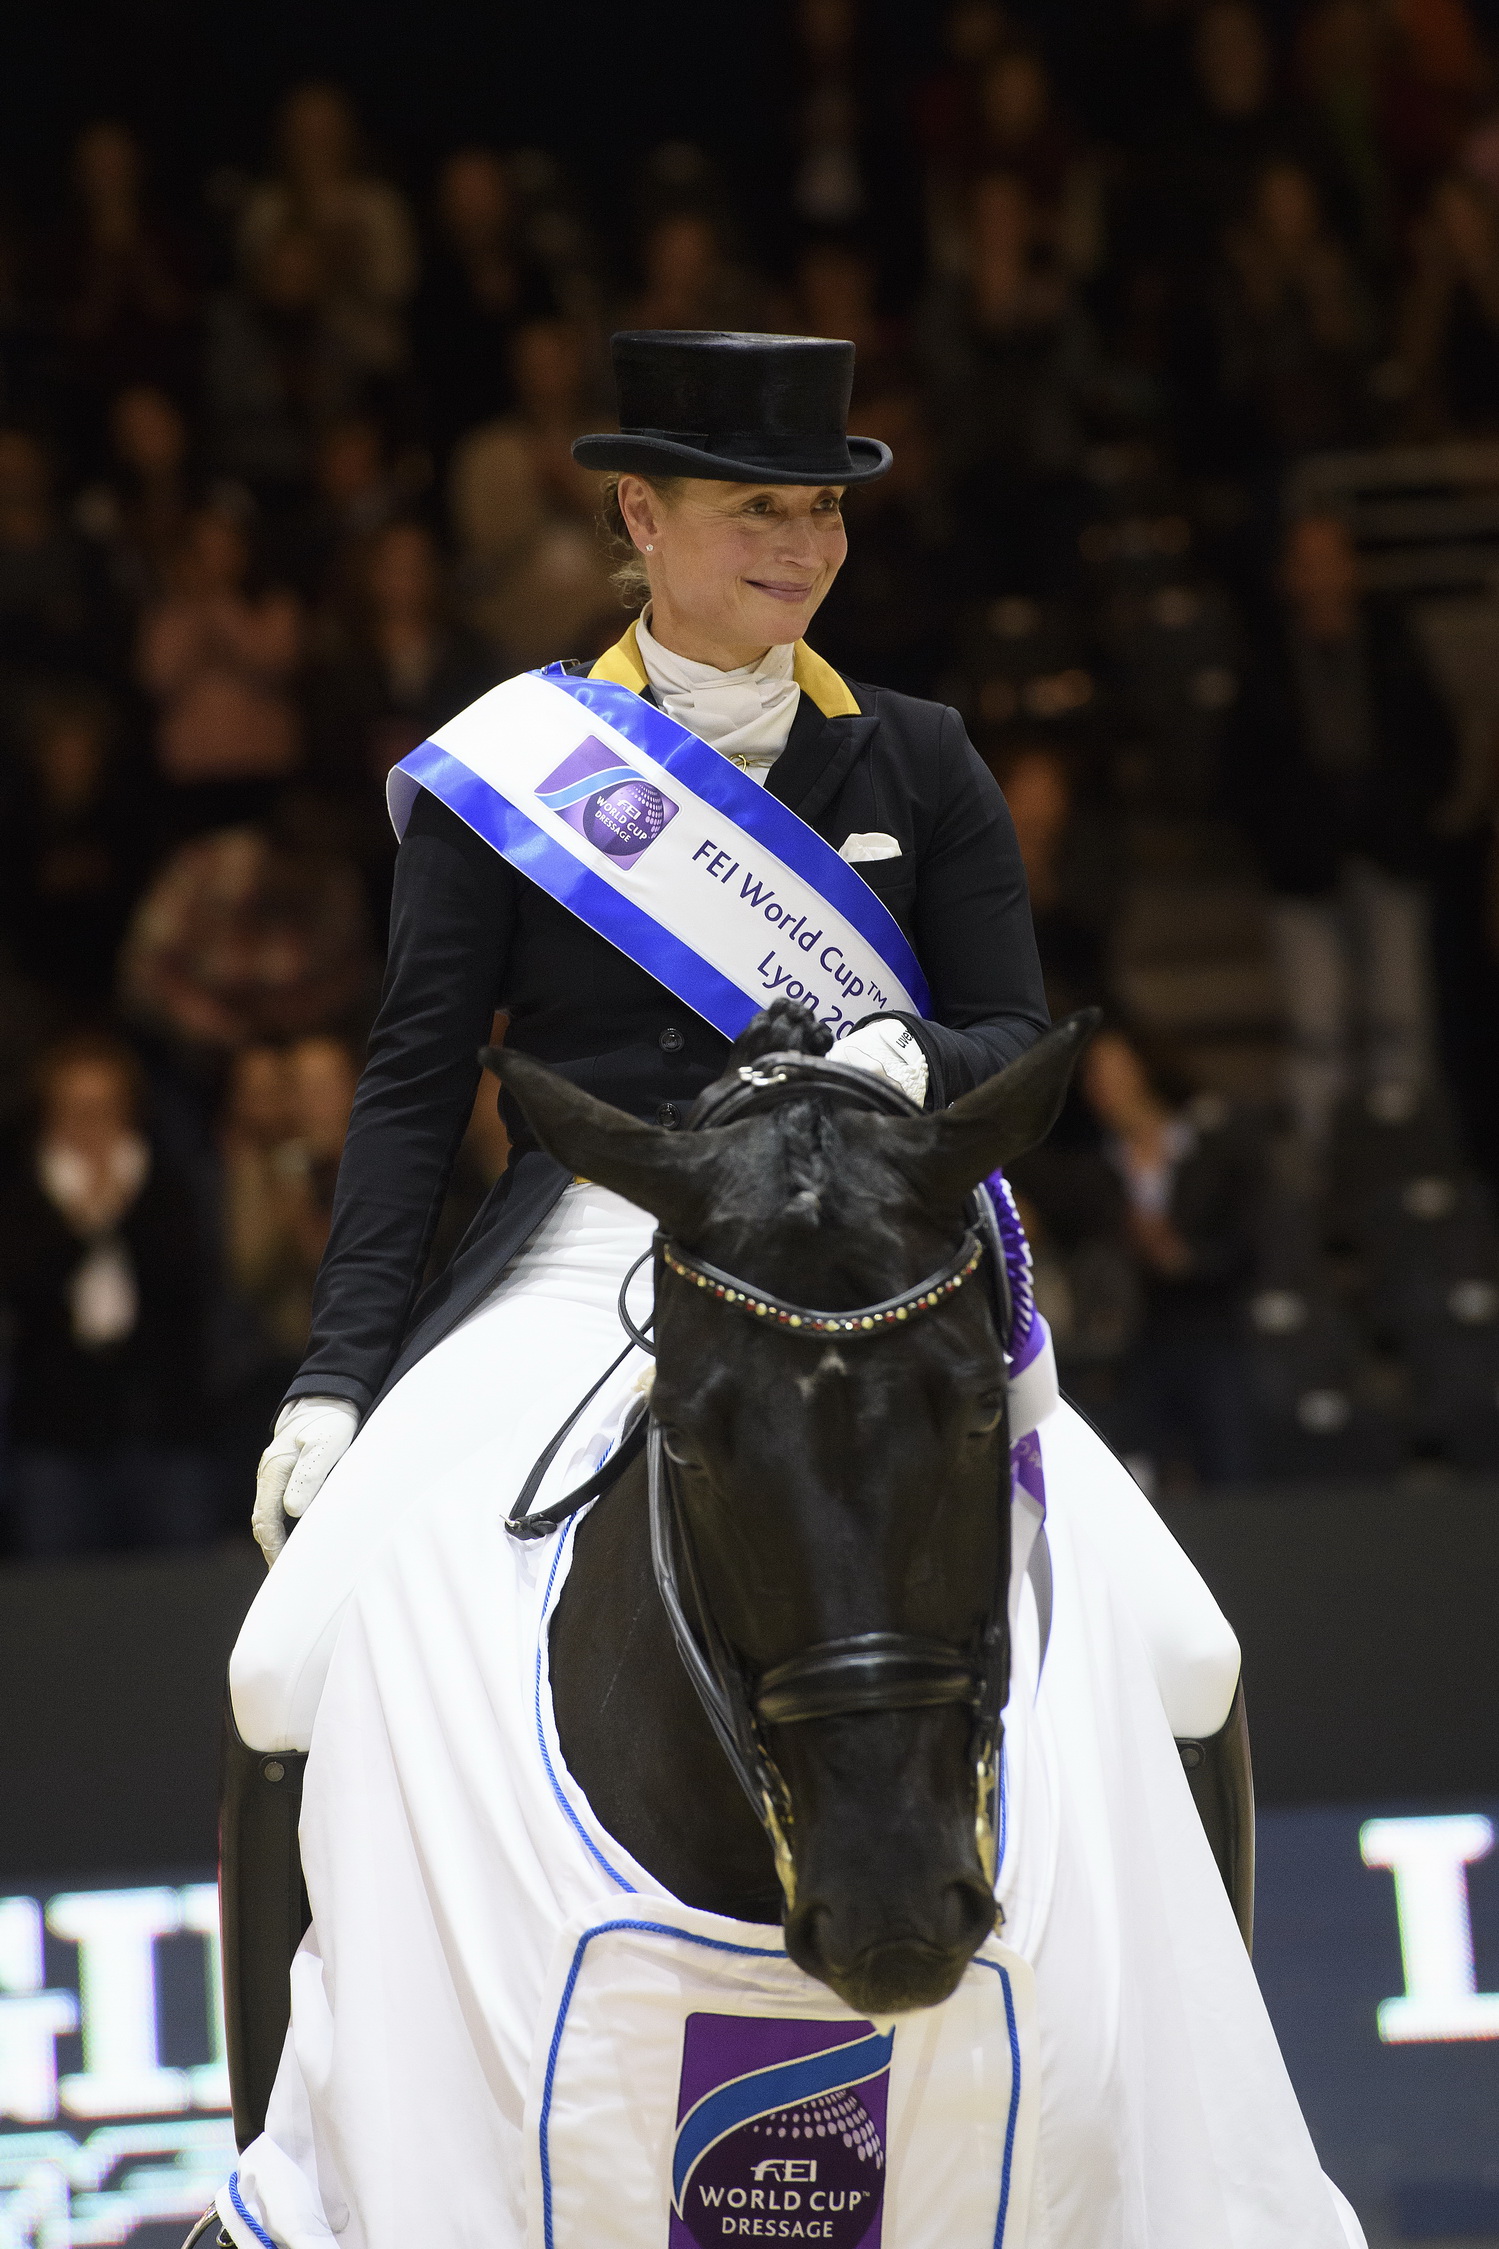 Germany’s Isabell Werth and Weihegold Old are now top of the world Dressage rankings thanks to their stellar win at last week’s FEI World Cup™ Dressage in Lyon (FRA), where Werth produced a personal-best Freestyle score of 90.09. (Richard Juilliart/FEI)